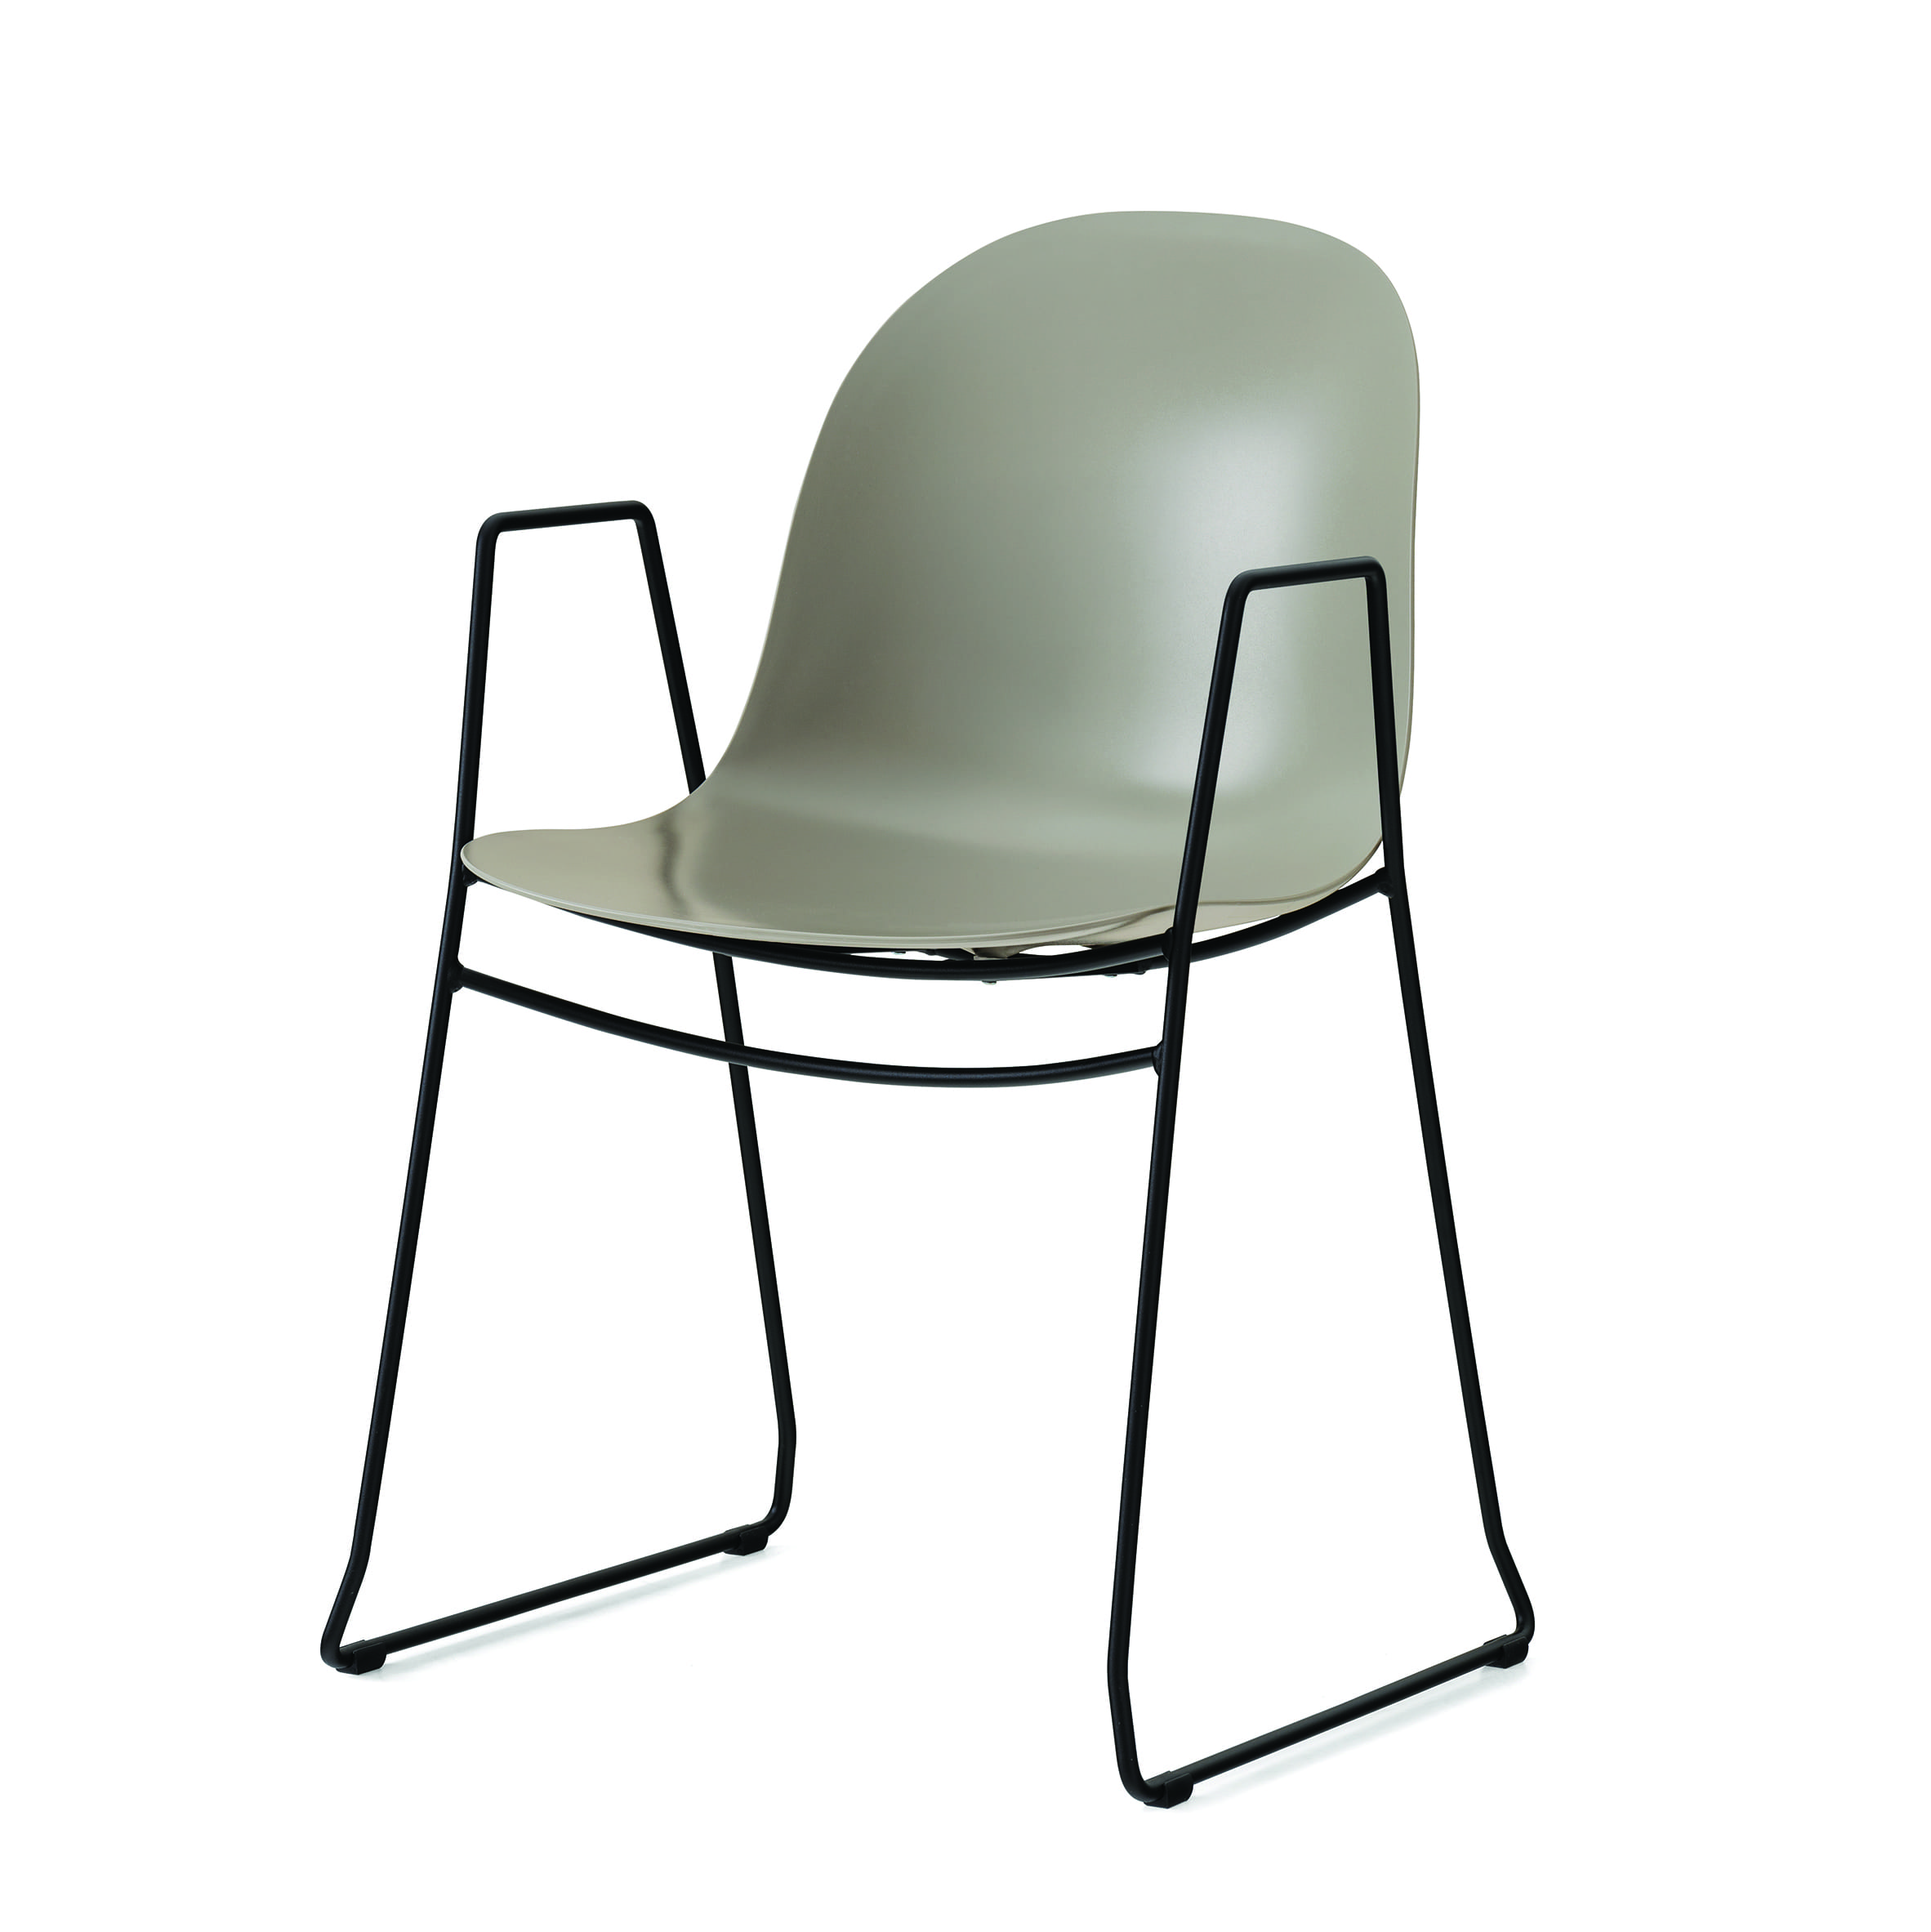 Chair by CB1697 Academy Connubia